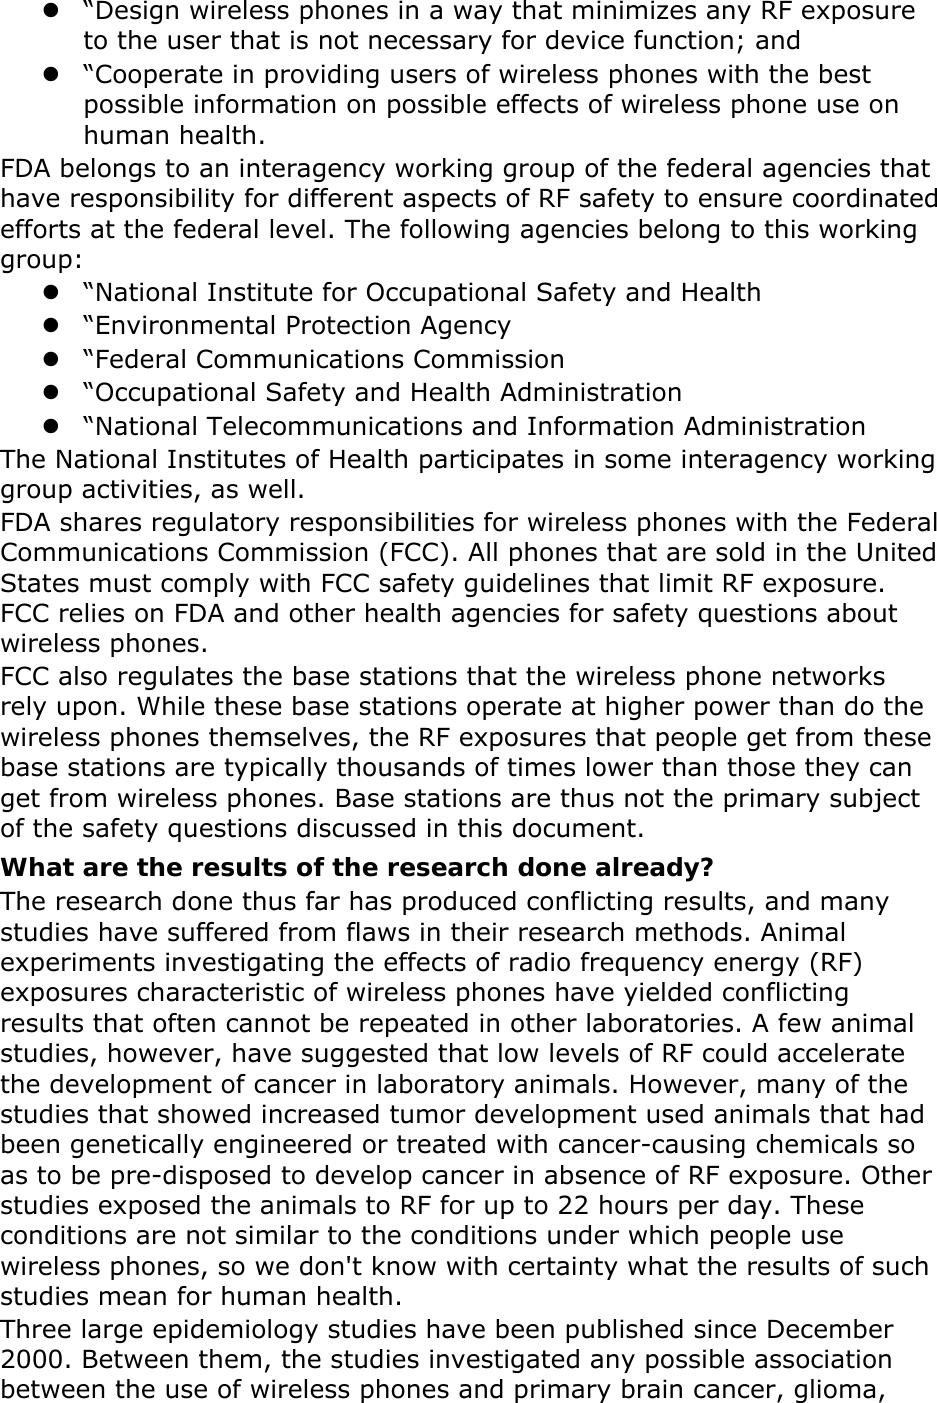  “Design wireless phones in a way that minimizes any RF exposure to the user that is not necessary for device function; and  “Cooperate in providing users of wireless phones with the best possible information on possible effects of wireless phone use on human health. FDA belongs to an interagency working group of the federal agencies that have responsibility for different aspects of RF safety to ensure coordinated efforts at the federal level. The following agencies belong to this working group:  “National Institute for Occupational Safety and Health  “Environmental Protection Agency  “Federal Communications Commission  “Occupational Safety and Health Administration  “National Telecommunications and Information Administration The National Institutes of Health participates in some interagency working group activities, as well. FDA shares regulatory responsibilities for wireless phones with the Federal Communications Commission (FCC). All phones that are sold in the United States must comply with FCC safety guidelines that limit RF exposure. FCC relies on FDA and other health agencies for safety questions about wireless phones. FCC also regulates the base stations that the wireless phone networks rely upon. While these base stations operate at higher power than do the wireless phones themselves, the RF exposures that people get from these base stations are typically thousands of times lower than those they can get from wireless phones. Base stations are thus not the primary subject of the safety questions discussed in this document. What are the results of the research done already? The research done thus far has produced conflicting results, and many studies have suffered from flaws in their research methods. Animal experiments investigating the effects of radio frequency energy (RF) exposures characteristic of wireless phones have yielded conflicting results that often cannot be repeated in other laboratories. A few animal studies, however, have suggested that low levels of RF could accelerate the development of cancer in laboratory animals. However, many of the studies that showed increased tumor development used animals that had been genetically engineered or treated with cancer-causing chemicals so as to be pre-disposed to develop cancer in absence of RF exposure. Other studies exposed the animals to RF for up to 22 hours per day. These conditions are not similar to the conditions under which people use wireless phones, so we don&apos;t know with certainty what the results of such studies mean for human health. Three large epidemiology studies have been published since December 2000. Between them, the studies investigated any possible association between the use of wireless phones and primary brain cancer, glioma, 